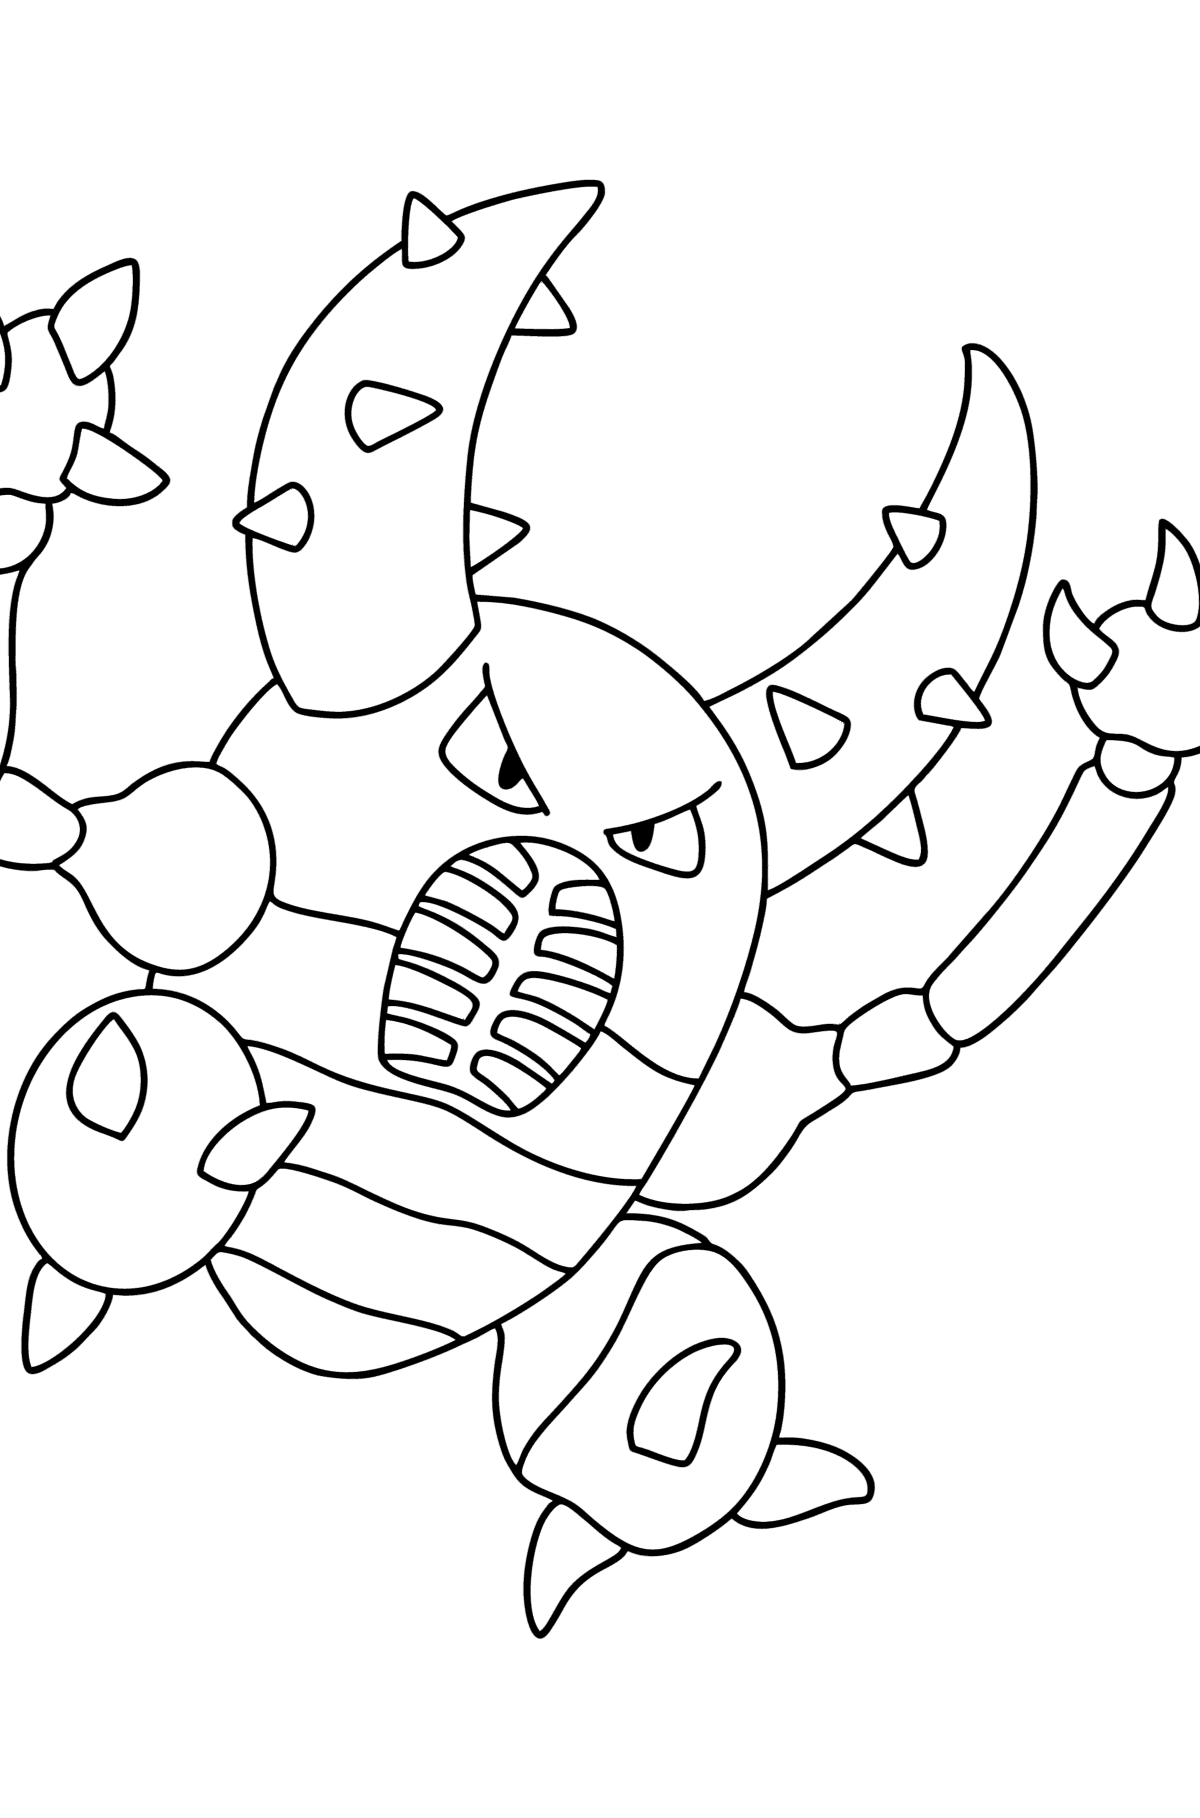 Colouring page Pokémon X and Y Pinsir - Coloring Pages for Kids